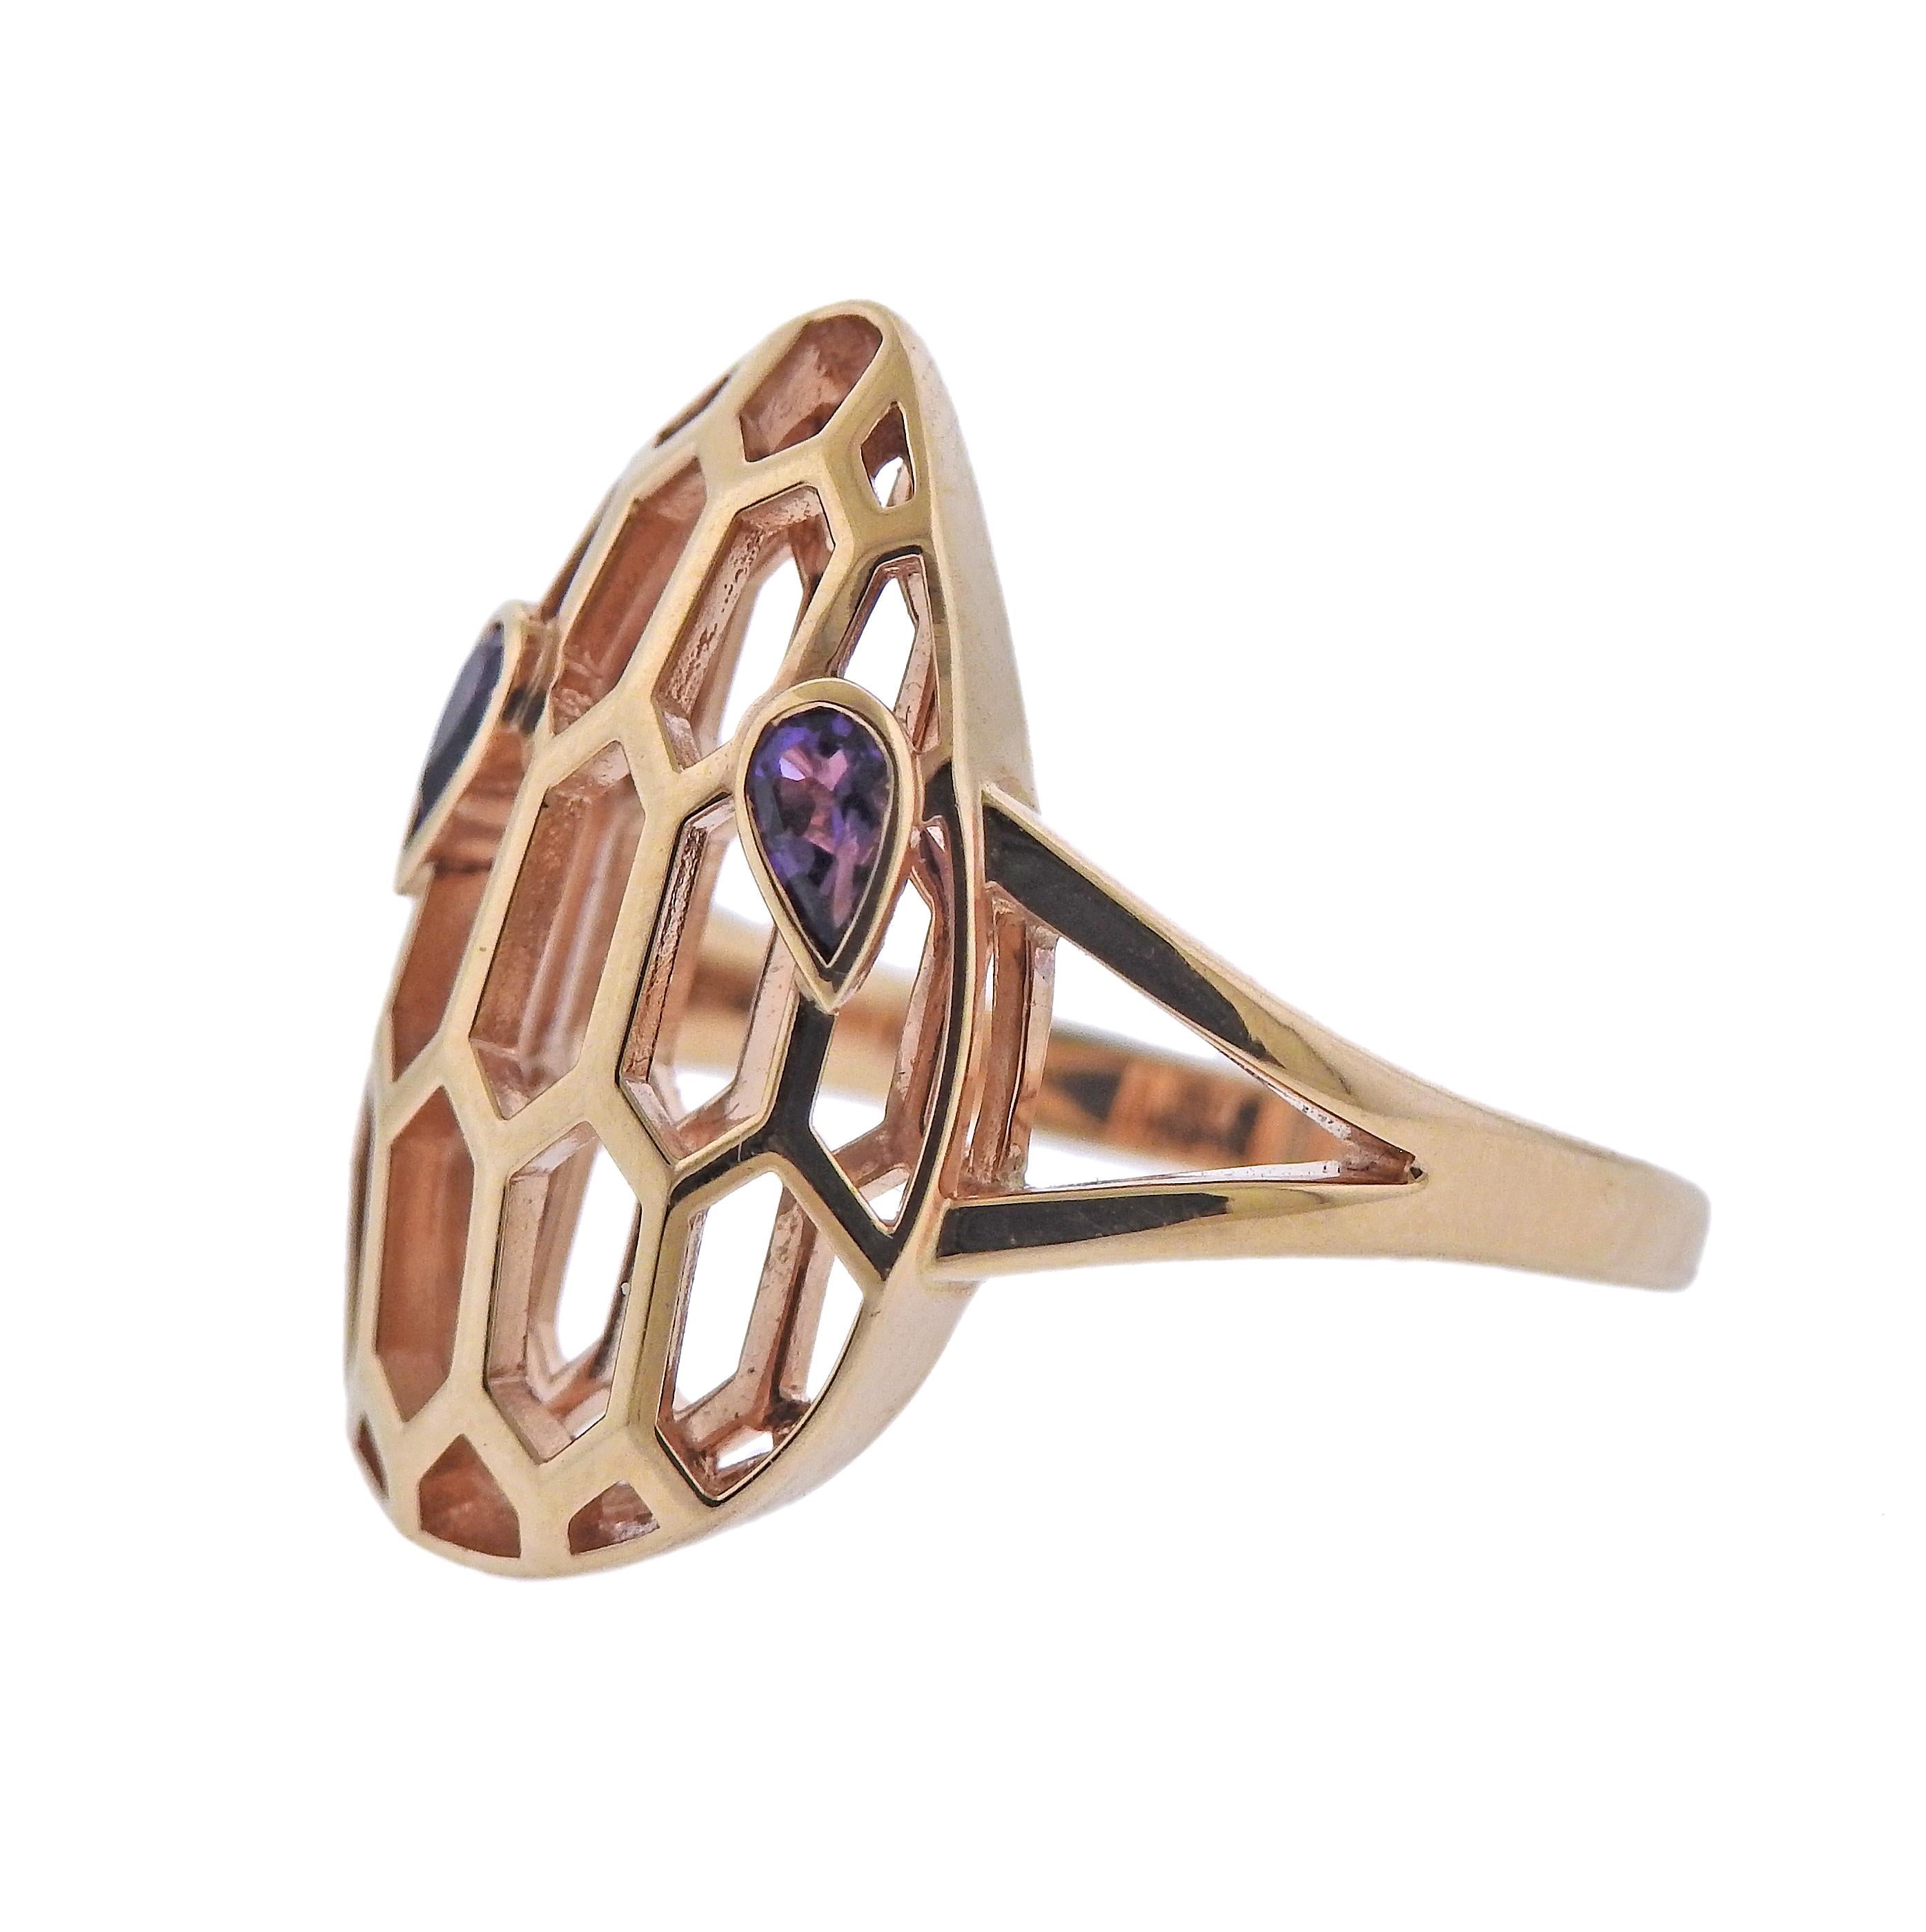 Bulgari 18k rose gold Serpenti ring with amethyst eyes. Ring is available in sizes 6 and 6.75. Top of the ring measures 21mm x 14mm. Marked:  Bvlgari, Au750, 2337AL, made in Italy, Serial #. Weight is 5.9 grams. Retail $2040, comes with box and COA.